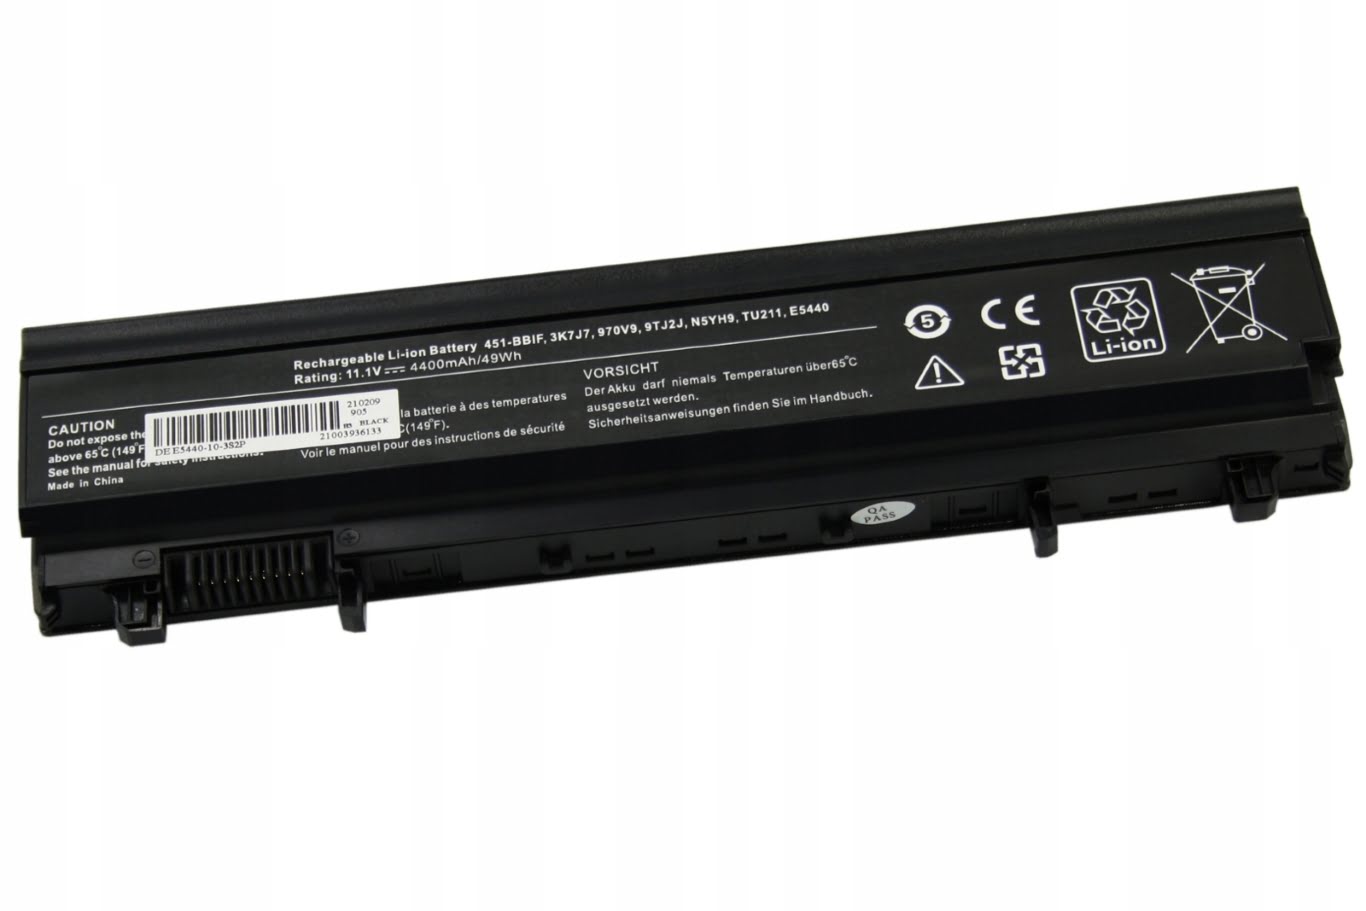 0K8HC, 1N9C0 replacement Laptop Battery for Dell Latitude 14 5000 Series, Latitude 15 5000 Series, 11.1V, 4400mAh, 6 cells